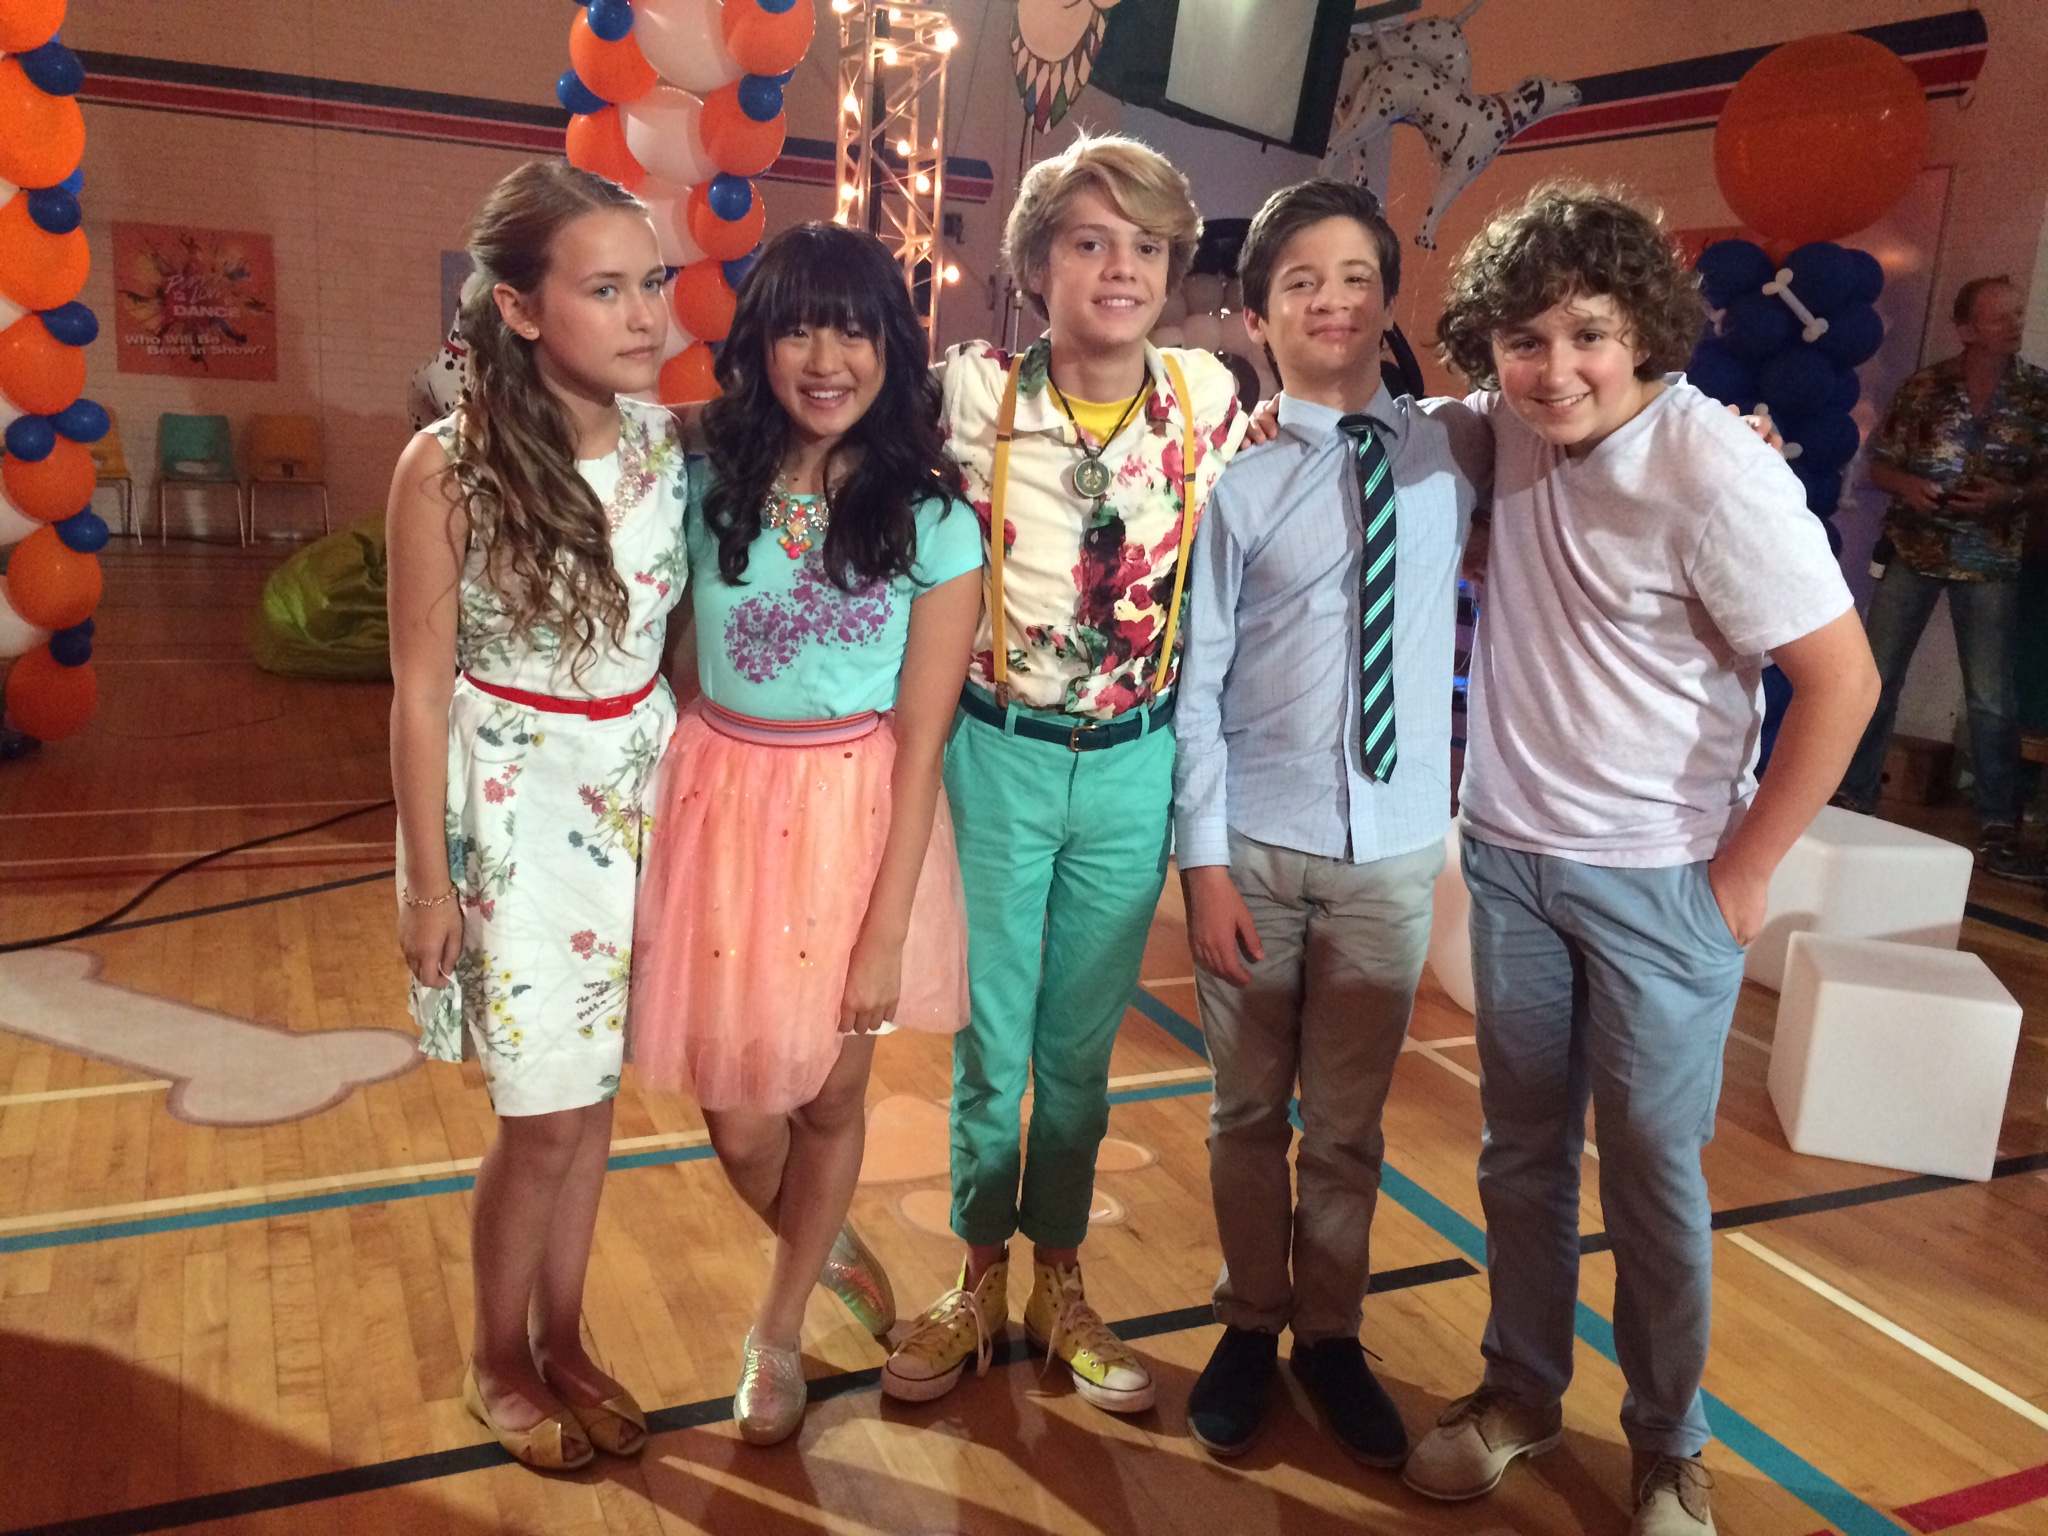 Sidney, Haley Tju, Jace Norman, Davis Cleveland and Darien Provost on the set of Nickelodeon's Rufus